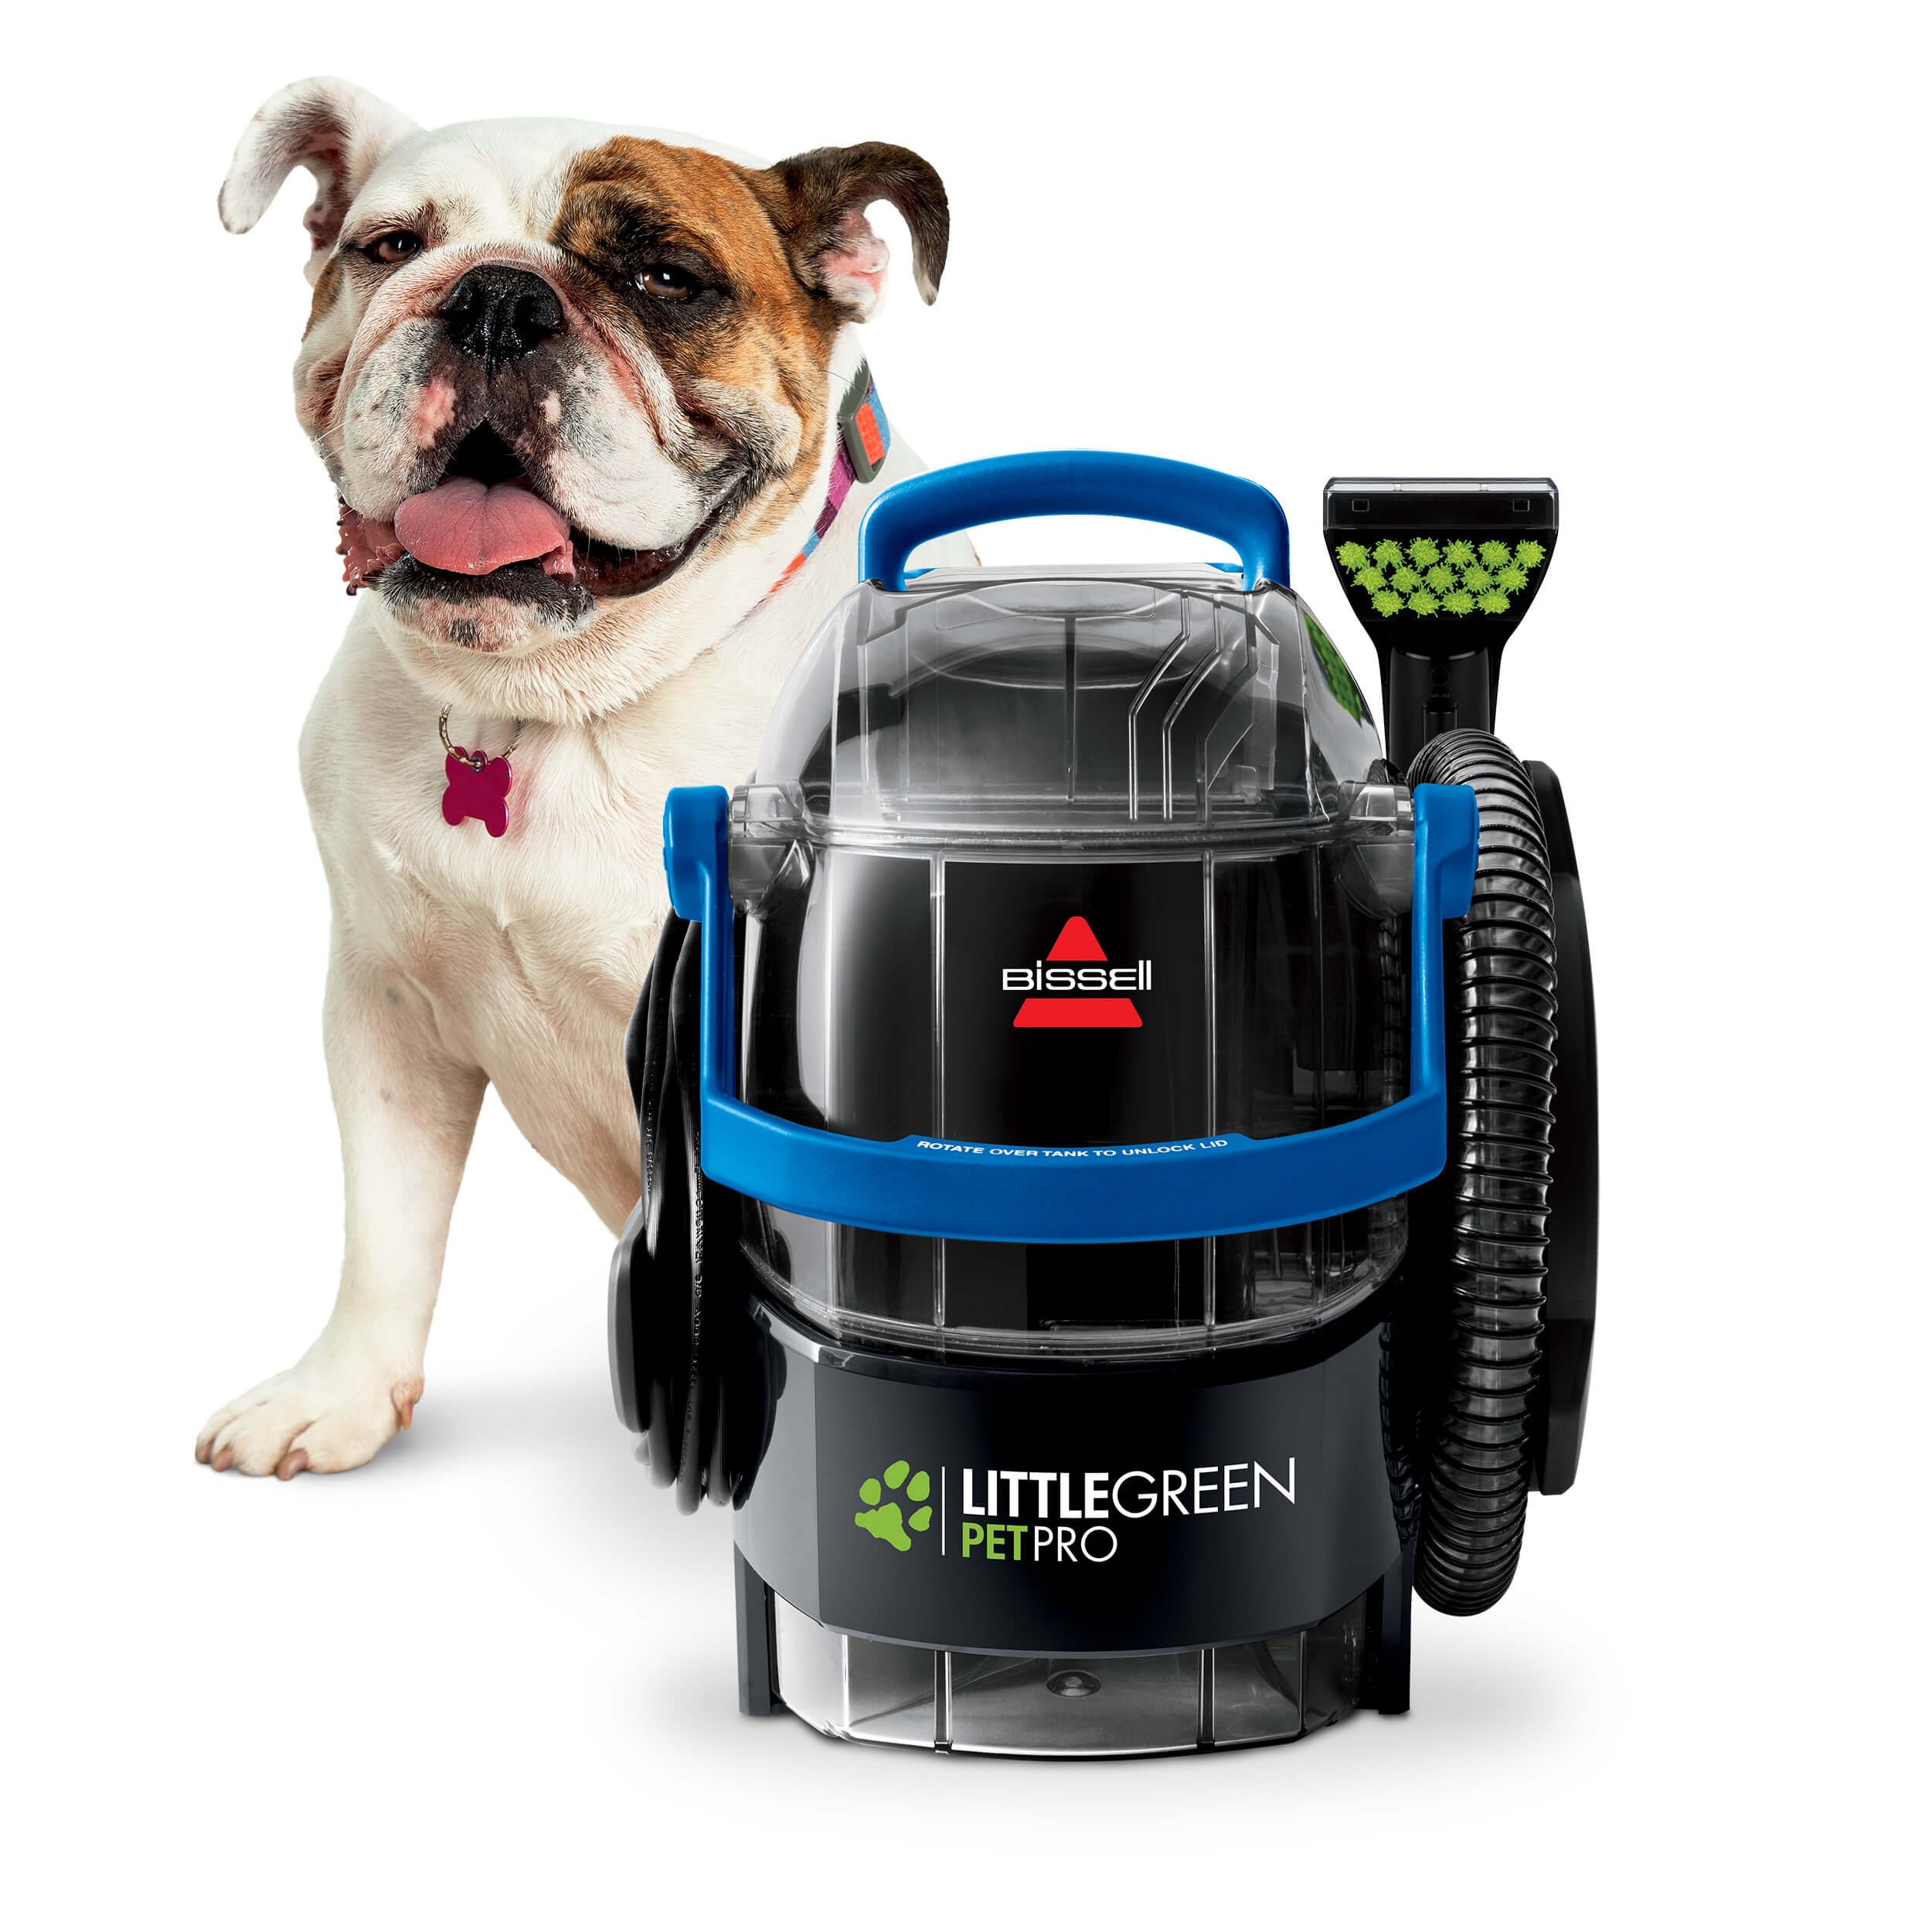 Пылесос pet pro. Bissell SPOTCLEAN. Bissell spot clean. Пылесос Bissell SPOTCLEAN. Bissell Pet Pro.